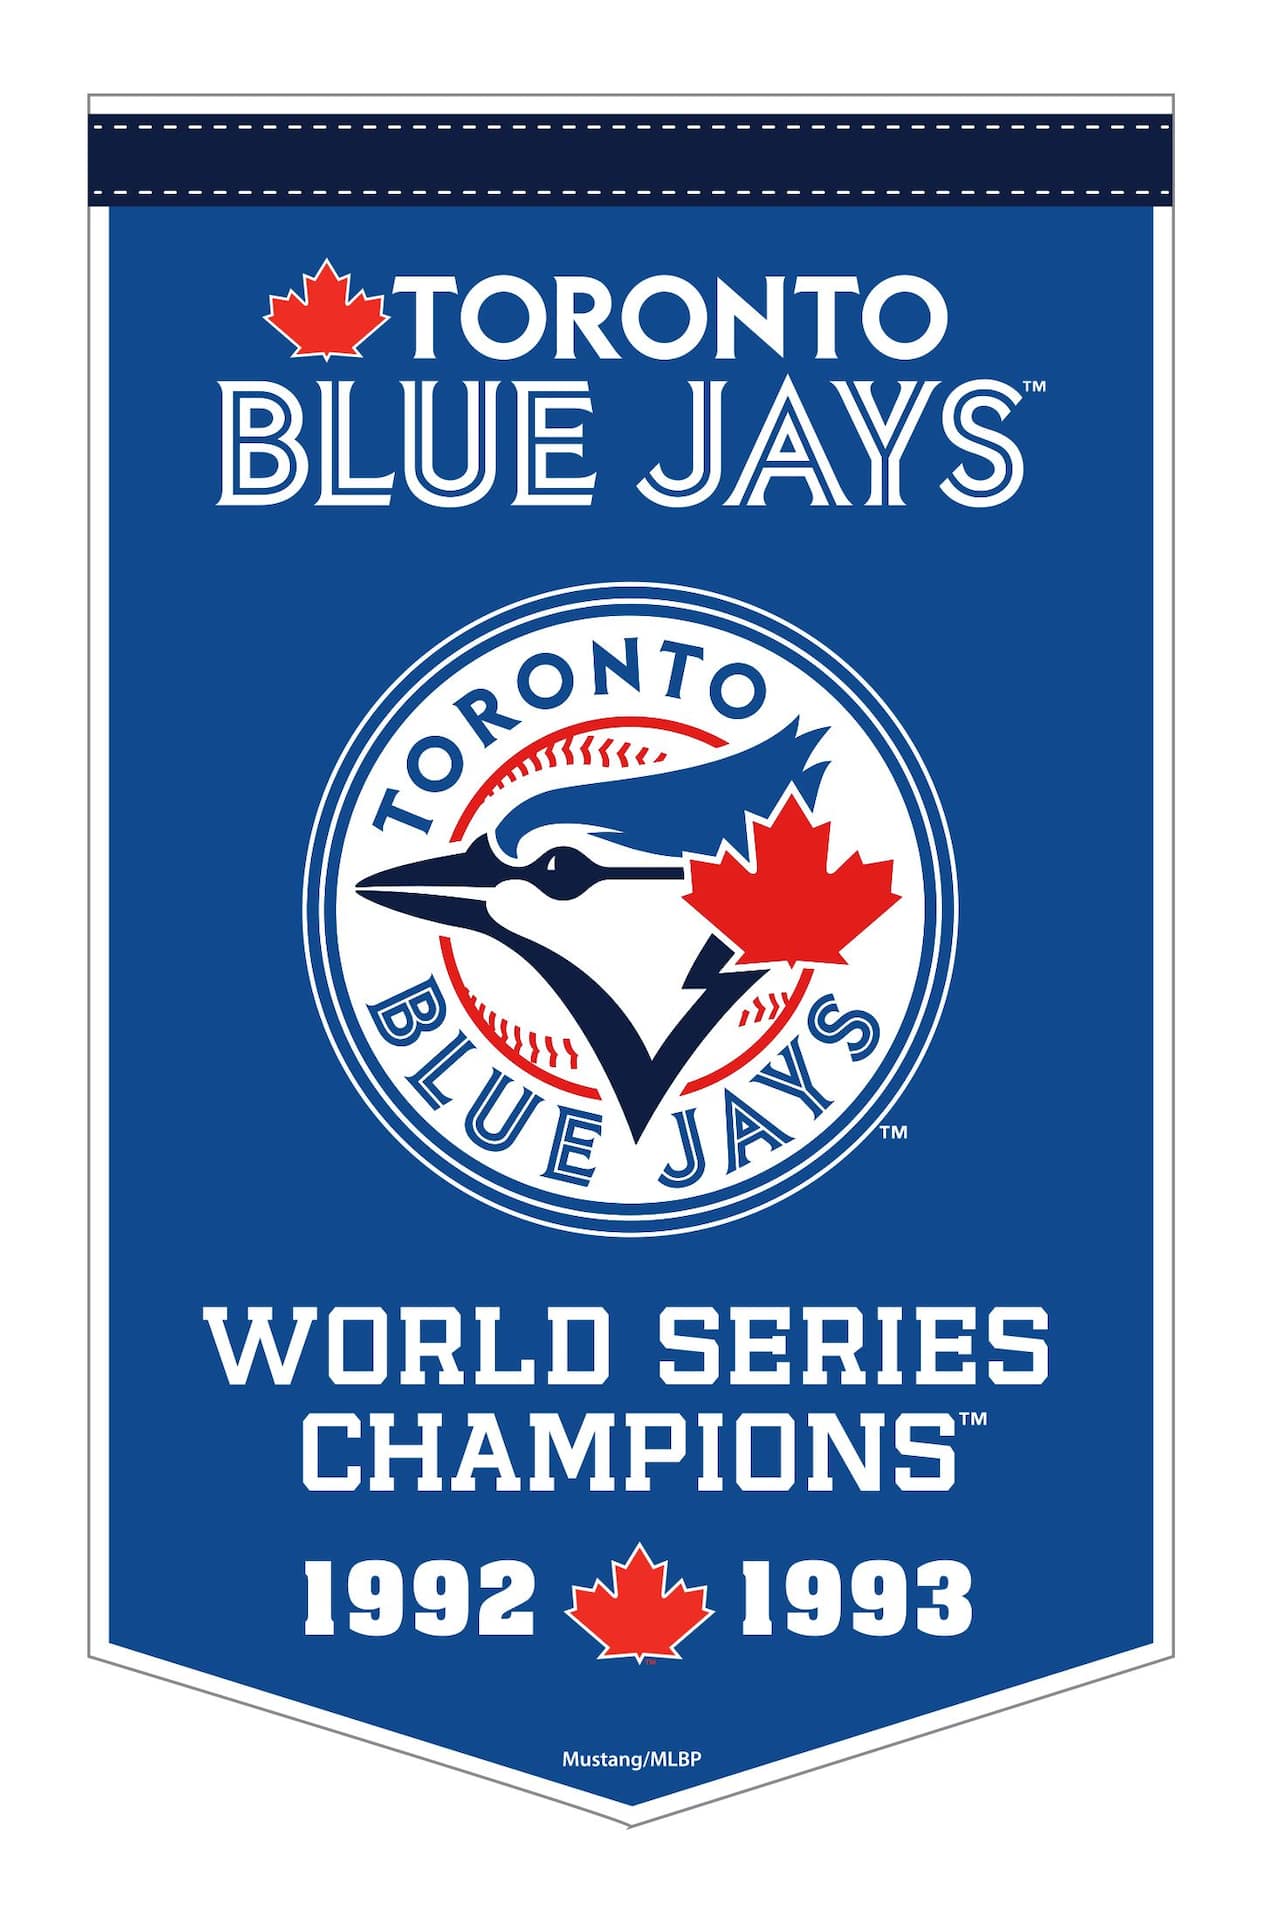 The Toronto Blue Jays Are The 1992 World Series Champions! 